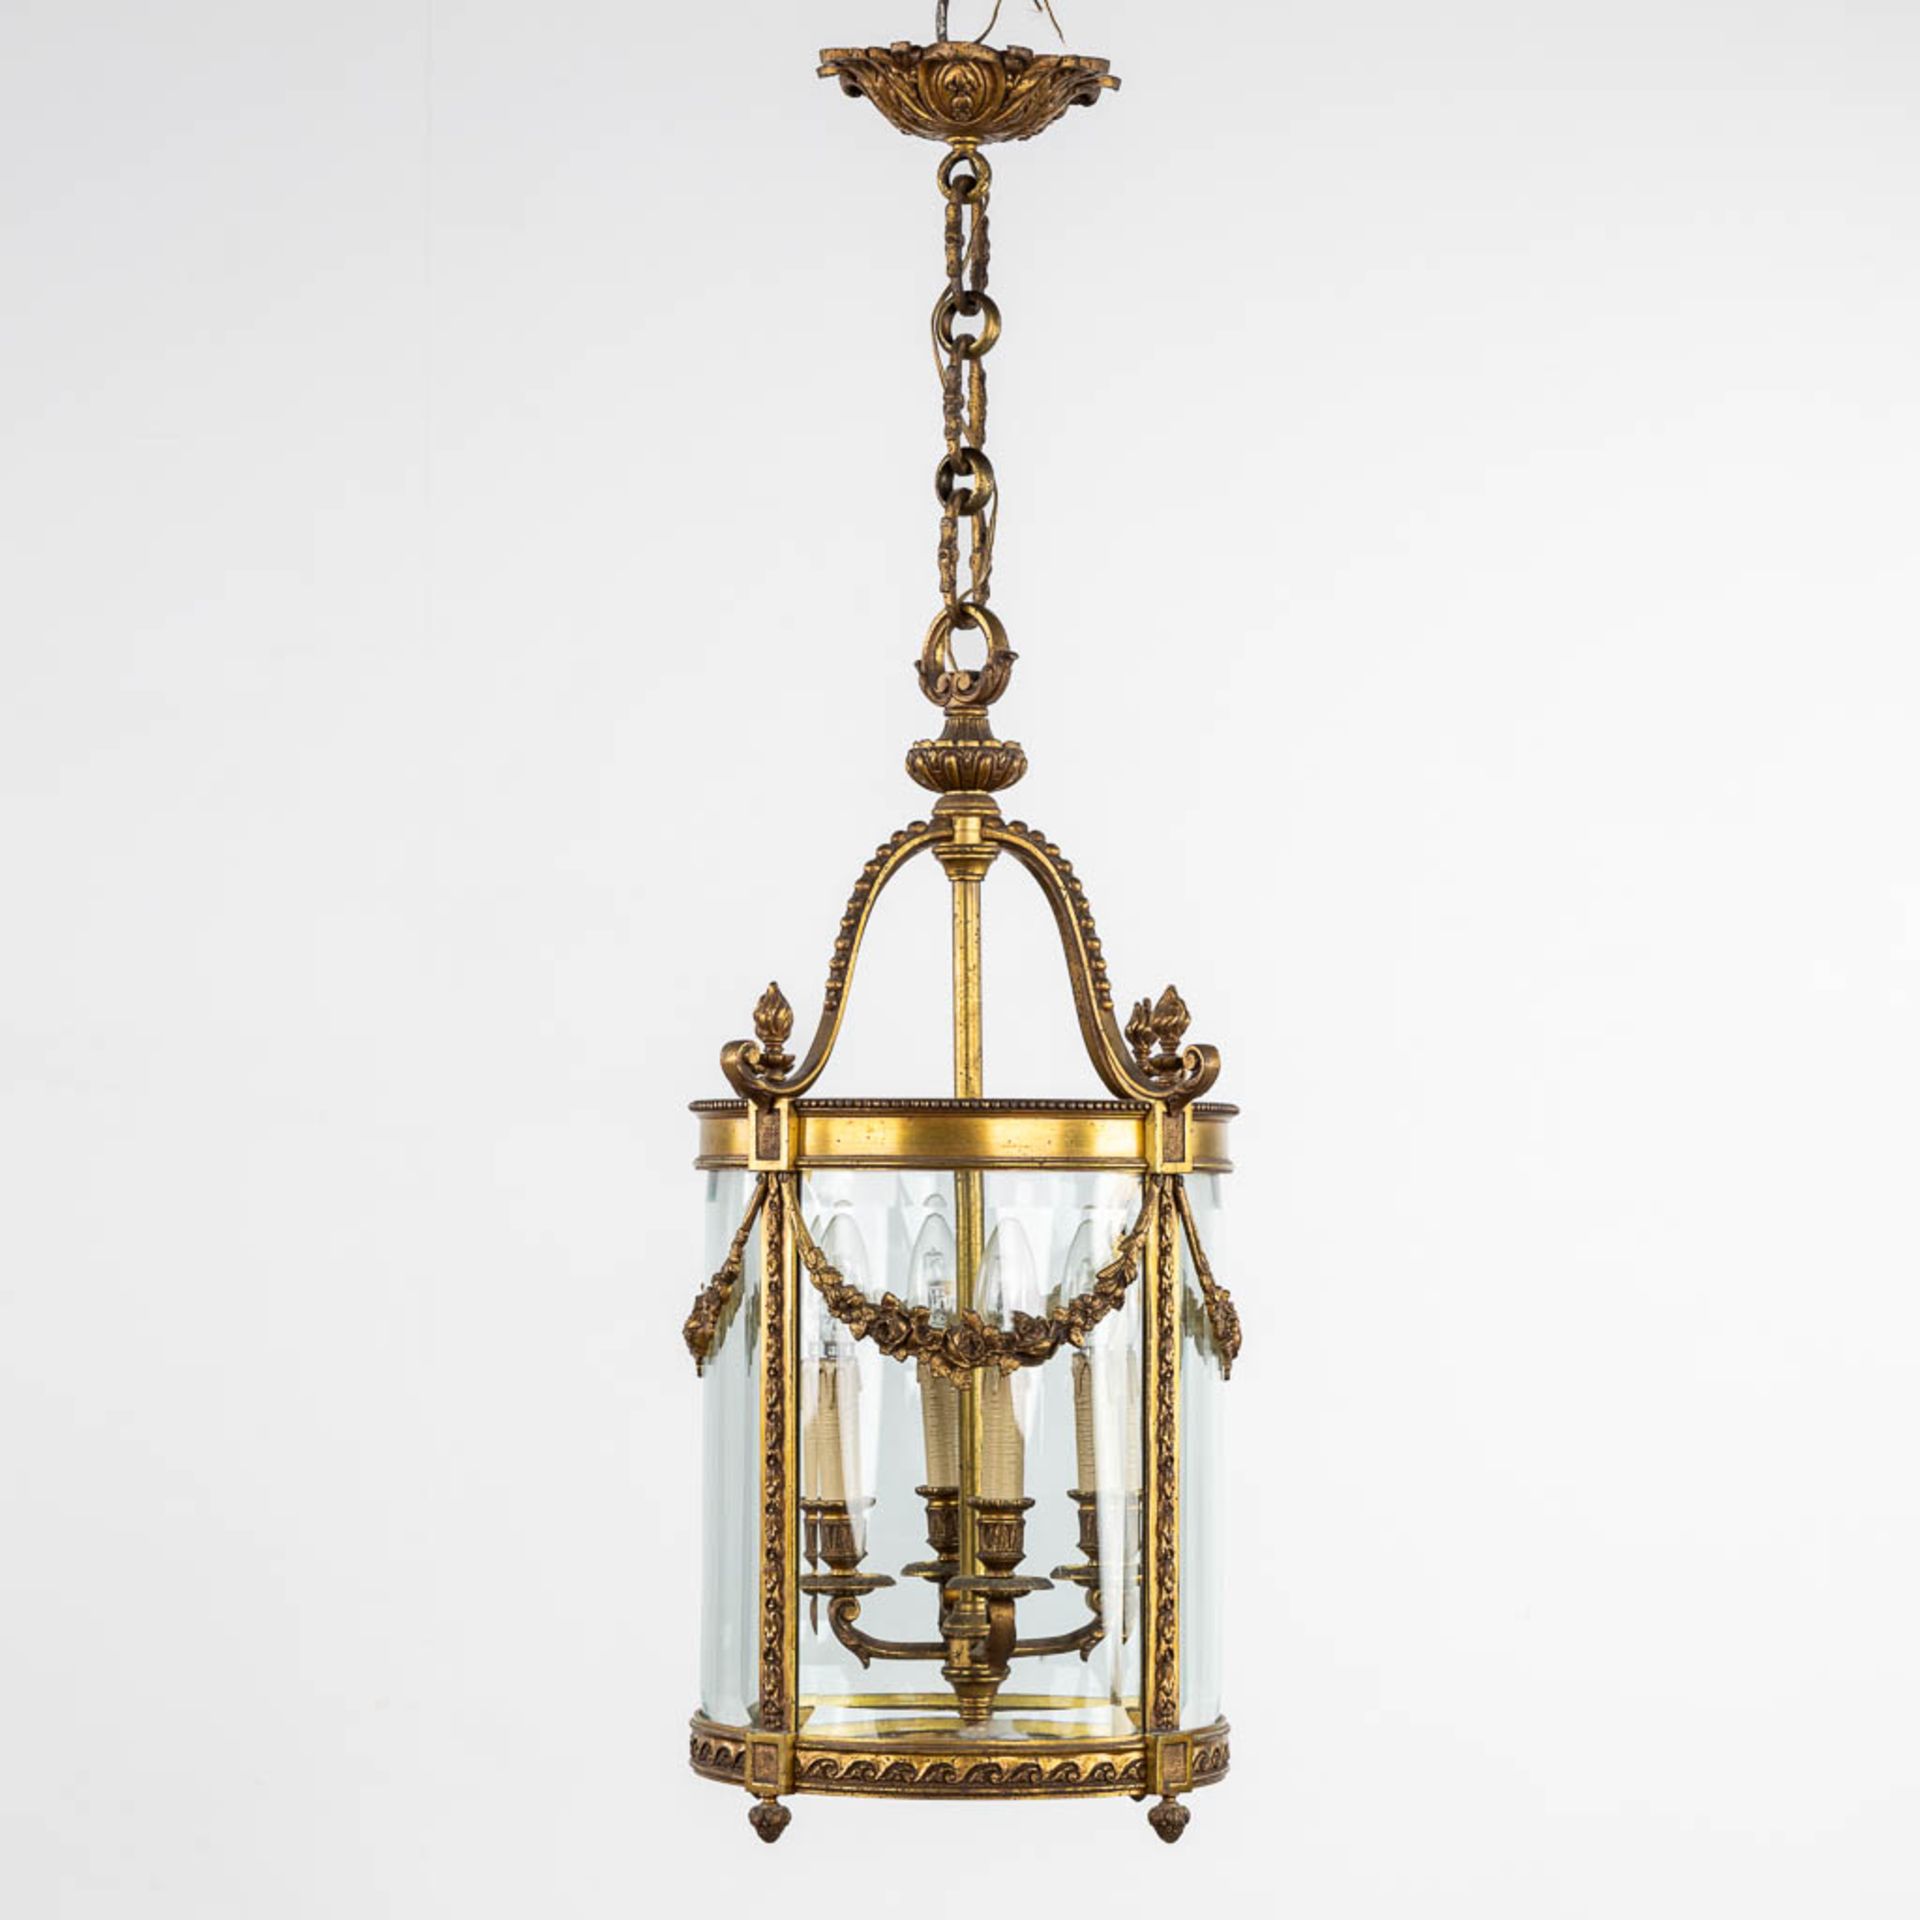 A lantern, brass and glass in Louis XVI style. (H:68 x D:37 cm)